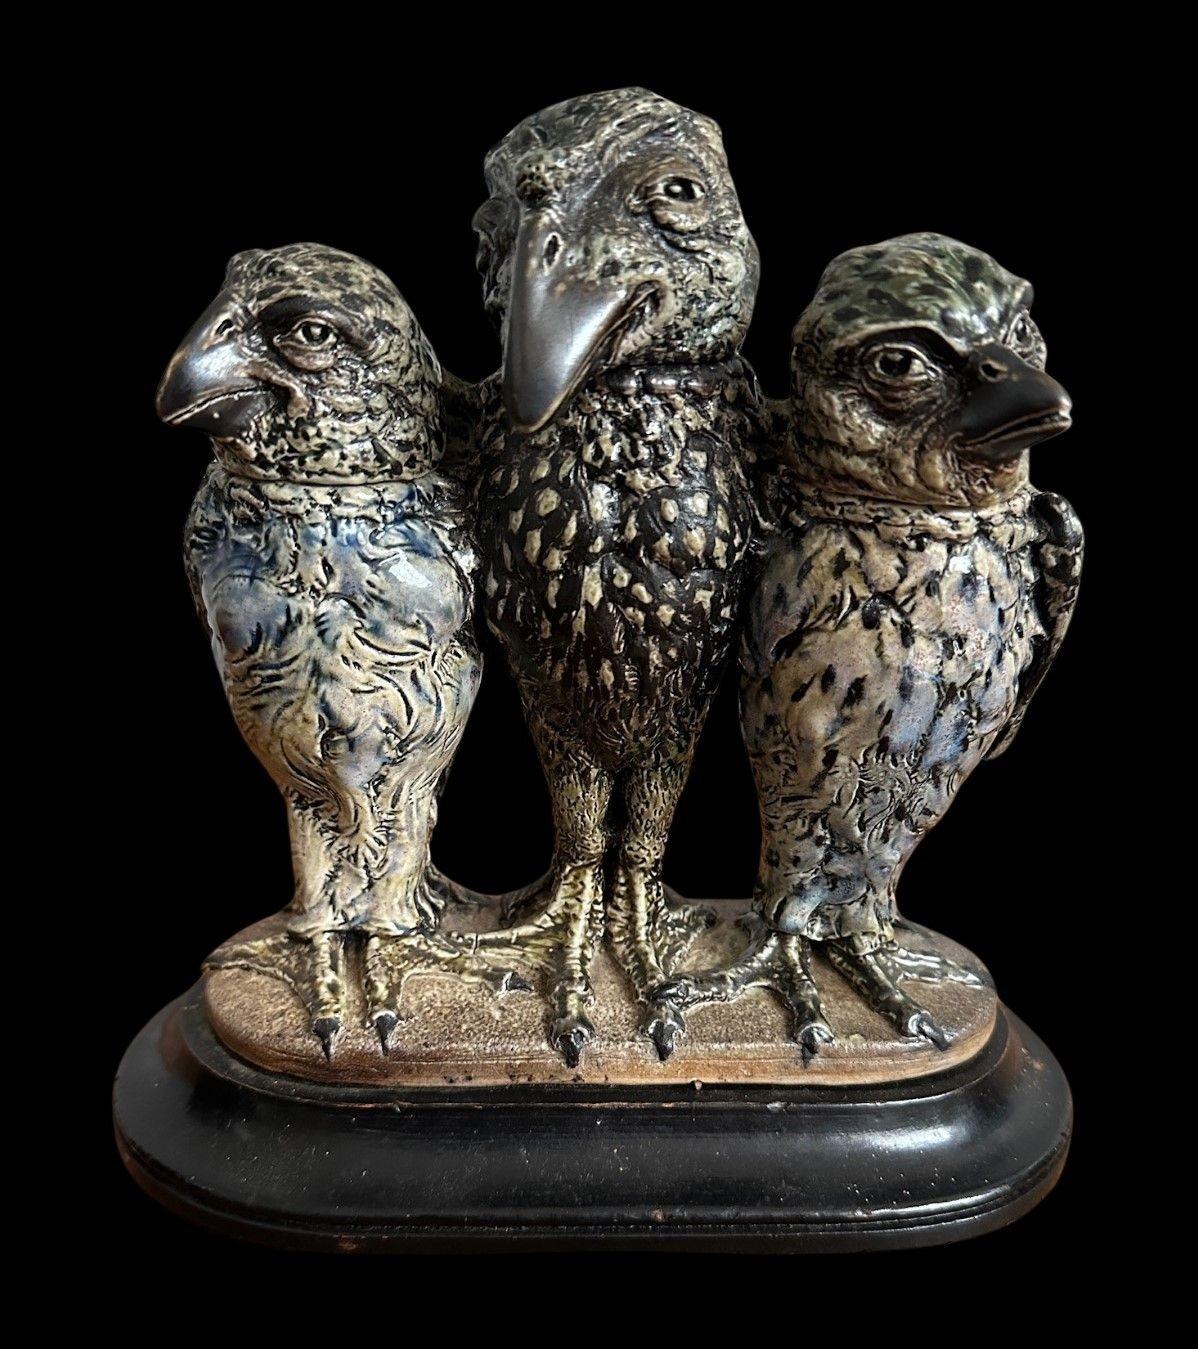 13
R W Martin for the Martin Brothers, a Rare and Well Modelled Tripple Bird Group modelled as a Central Male Bird with a Female either side.
17.5cm high, 16cm wide, 6cm deep
Dated 1914